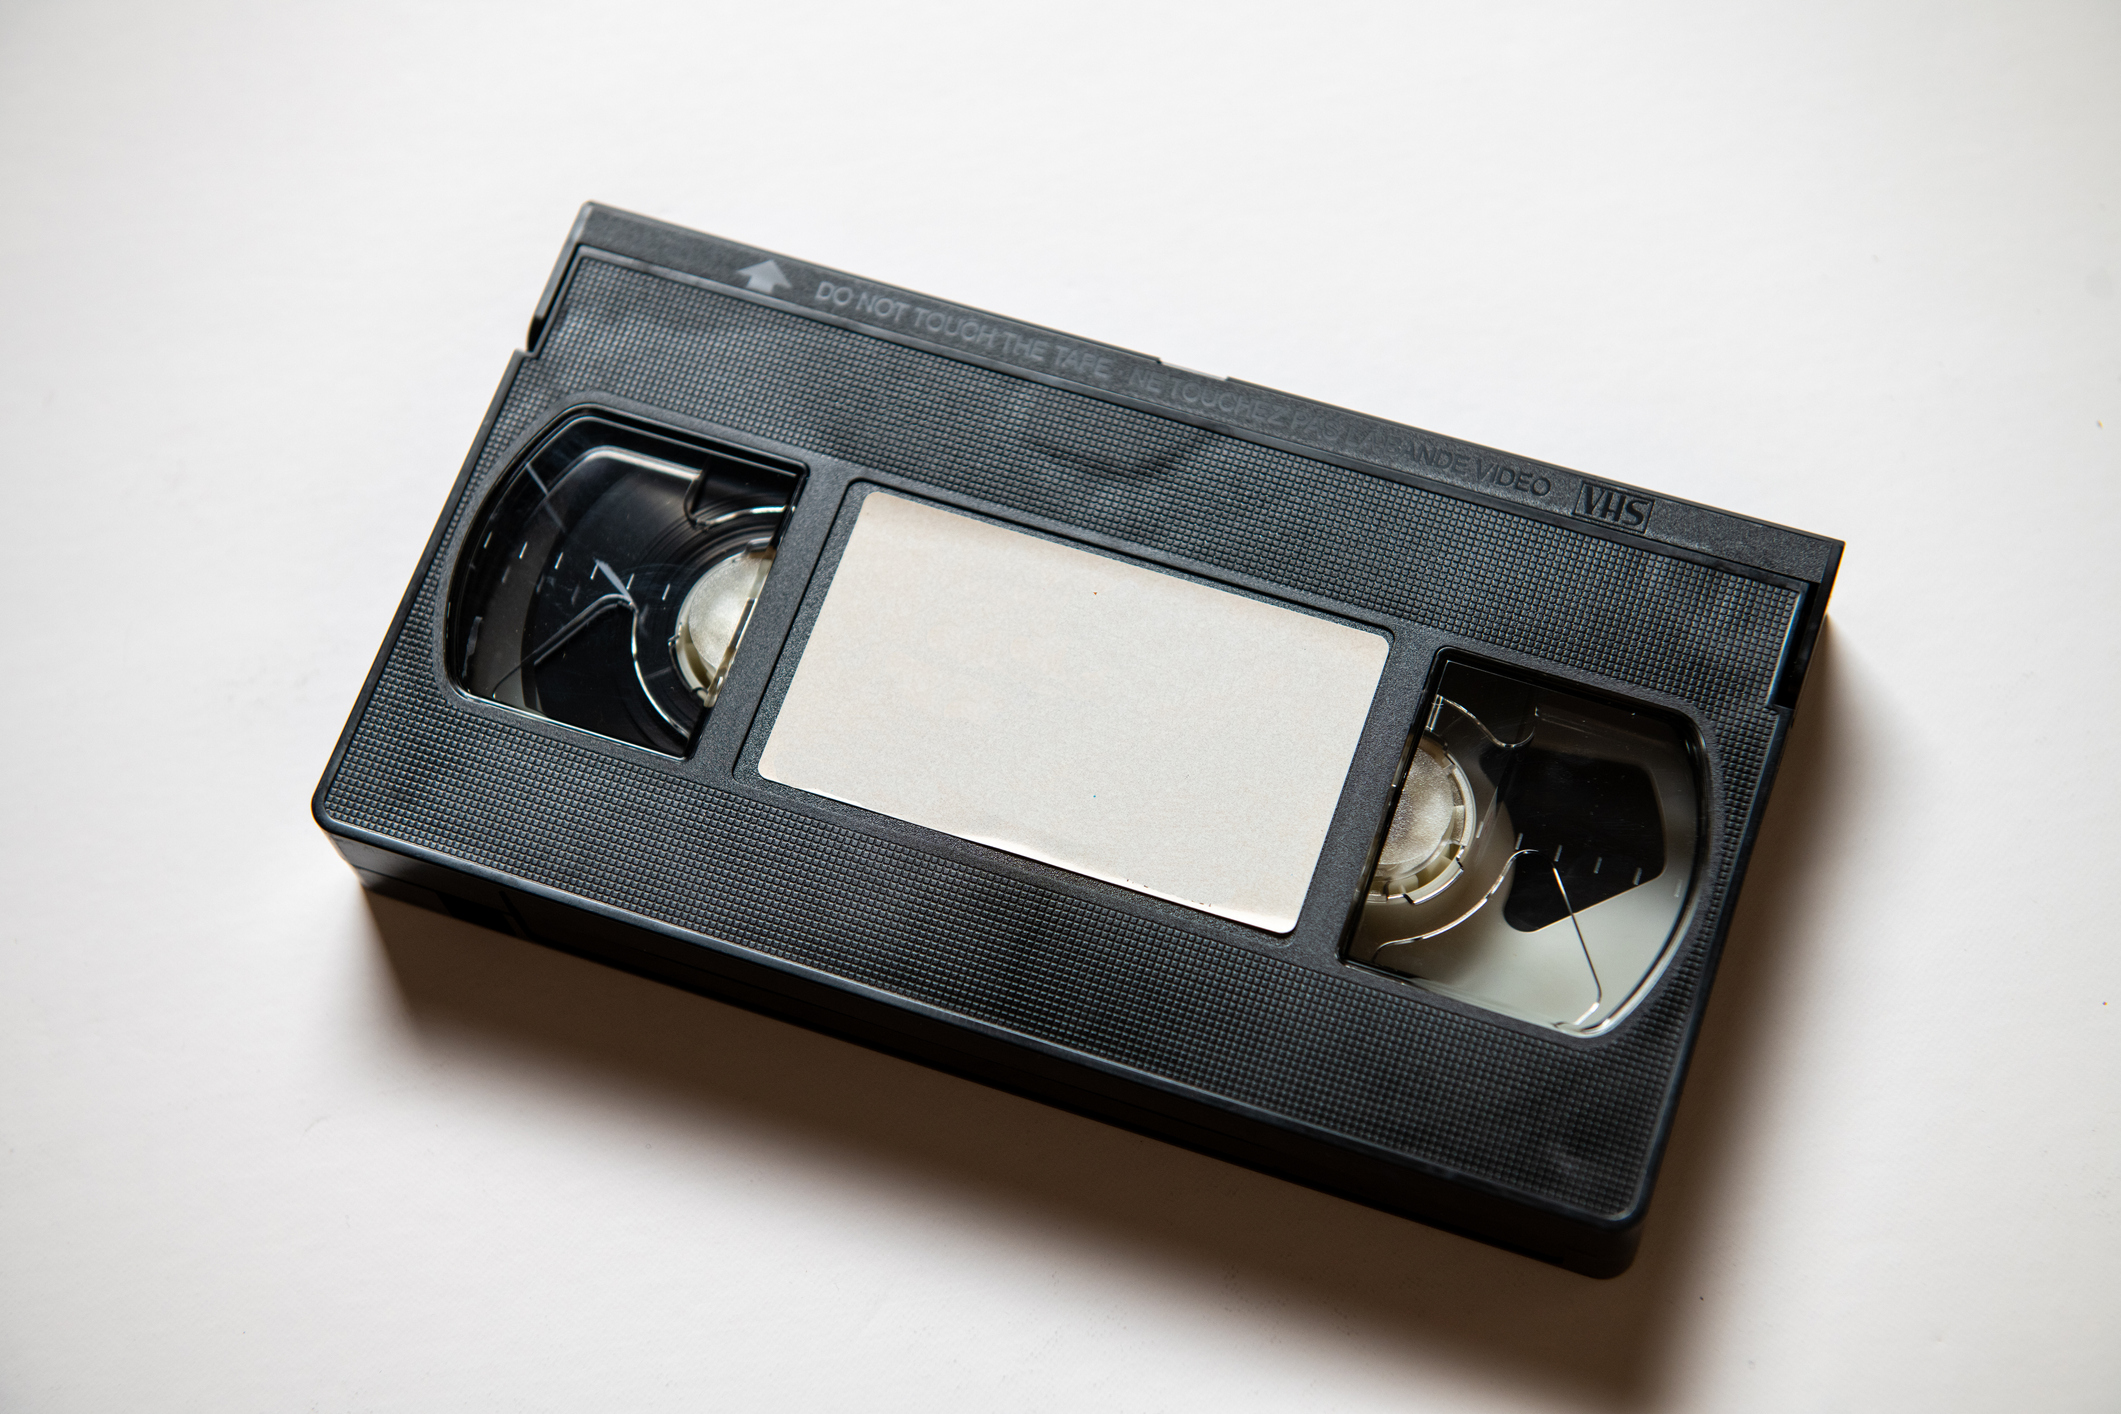 VHS Tapes Are Worth Money - The New York Times